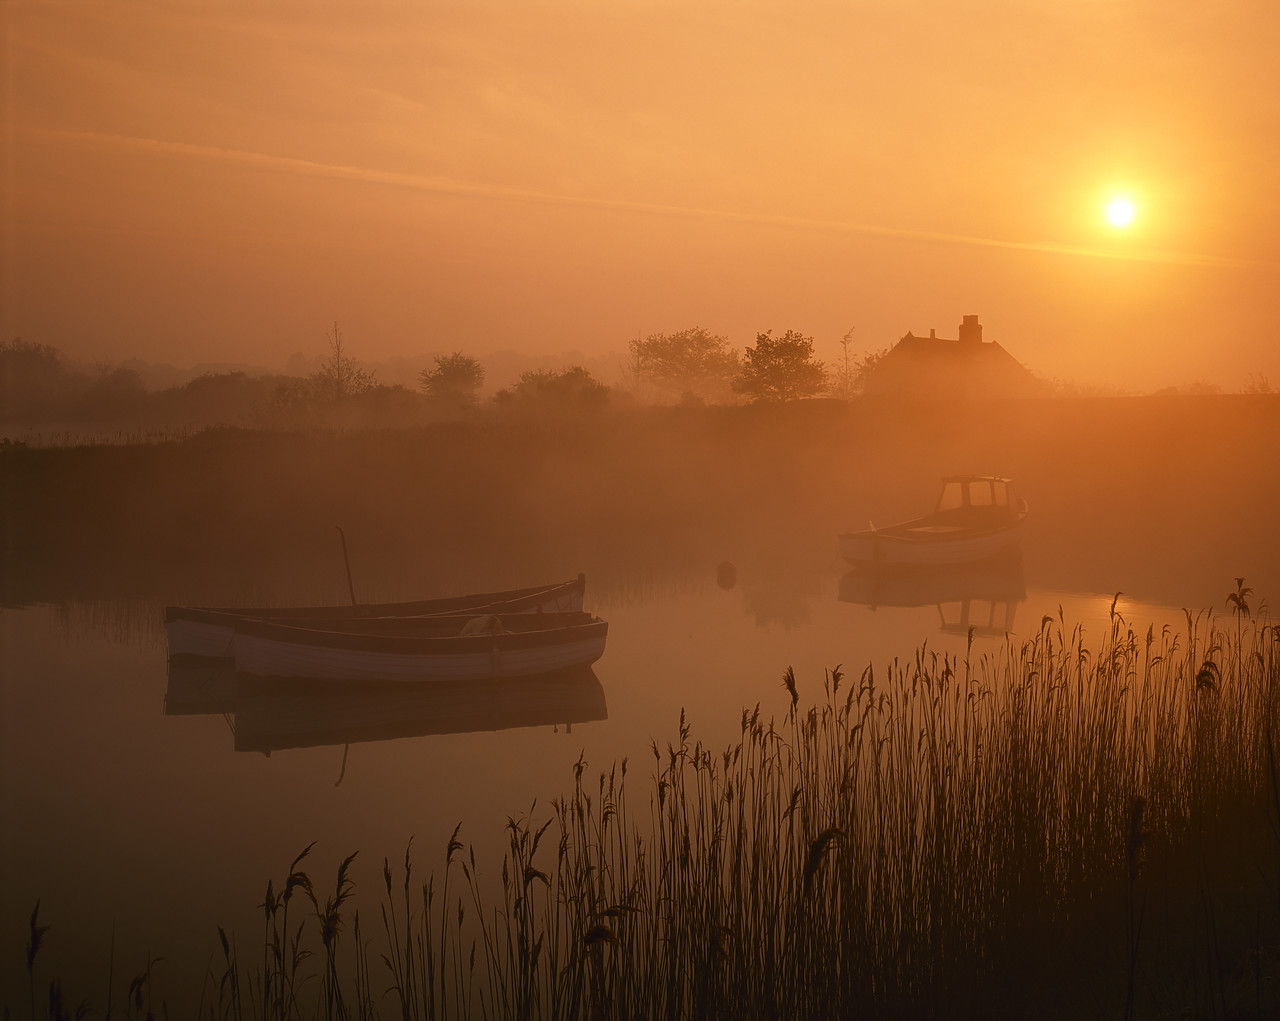 #955505-1 - Boats on River Alde at Sunrise, Snape, Suffolk, England